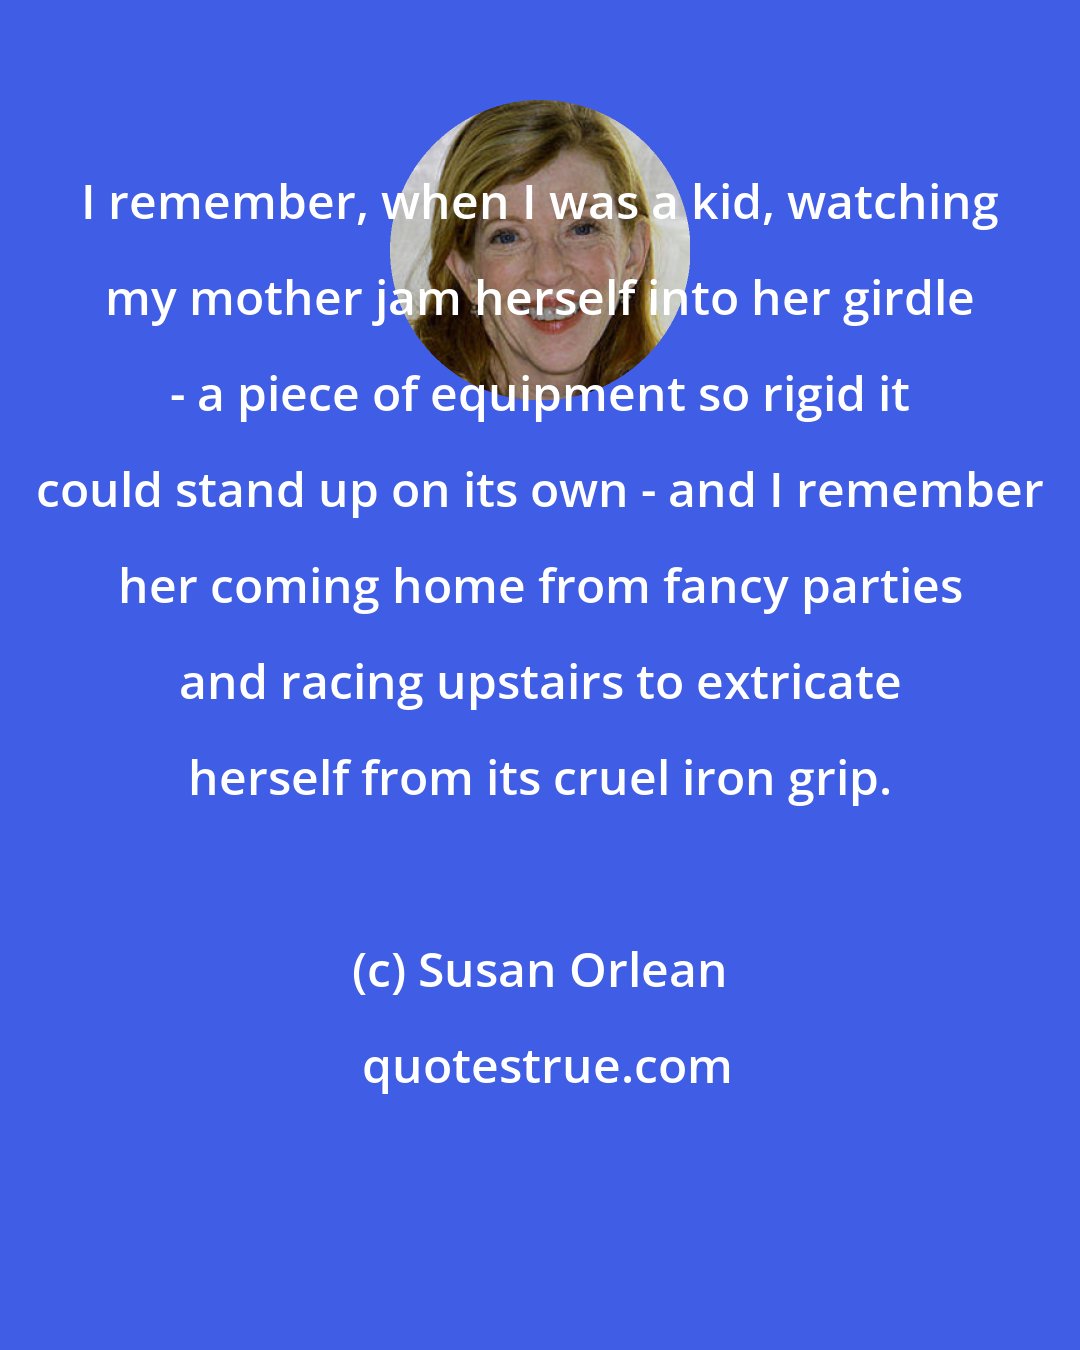 Susan Orlean: I remember, when I was a kid, watching my mother jam herself into her girdle - a piece of equipment so rigid it could stand up on its own - and I remember her coming home from fancy parties and racing upstairs to extricate herself from its cruel iron grip.